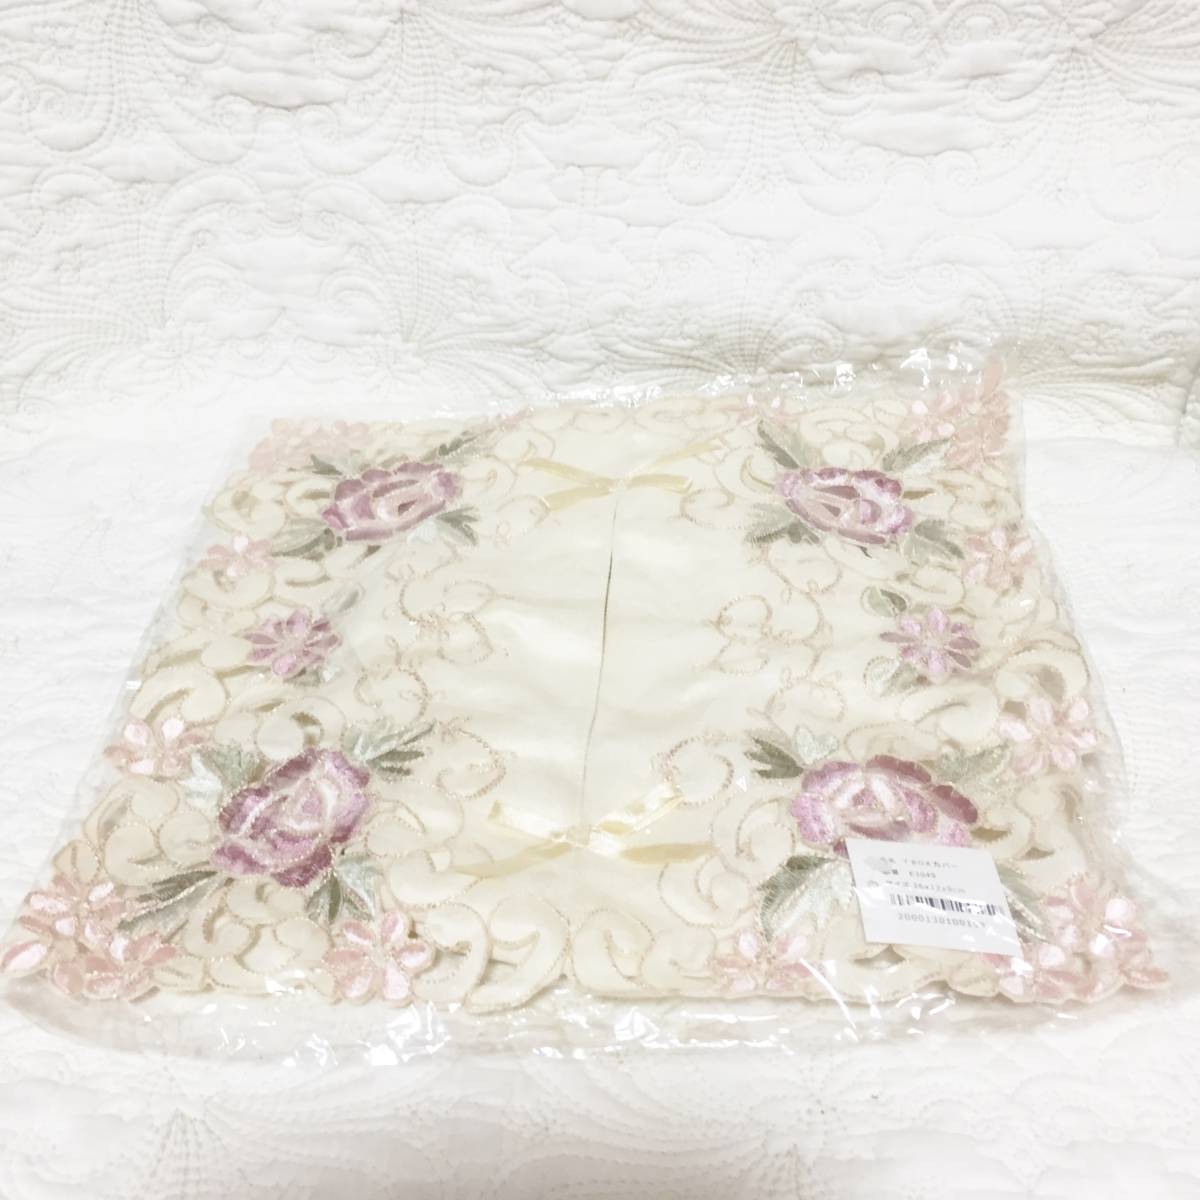  tag equipped floral print race tissue cover 